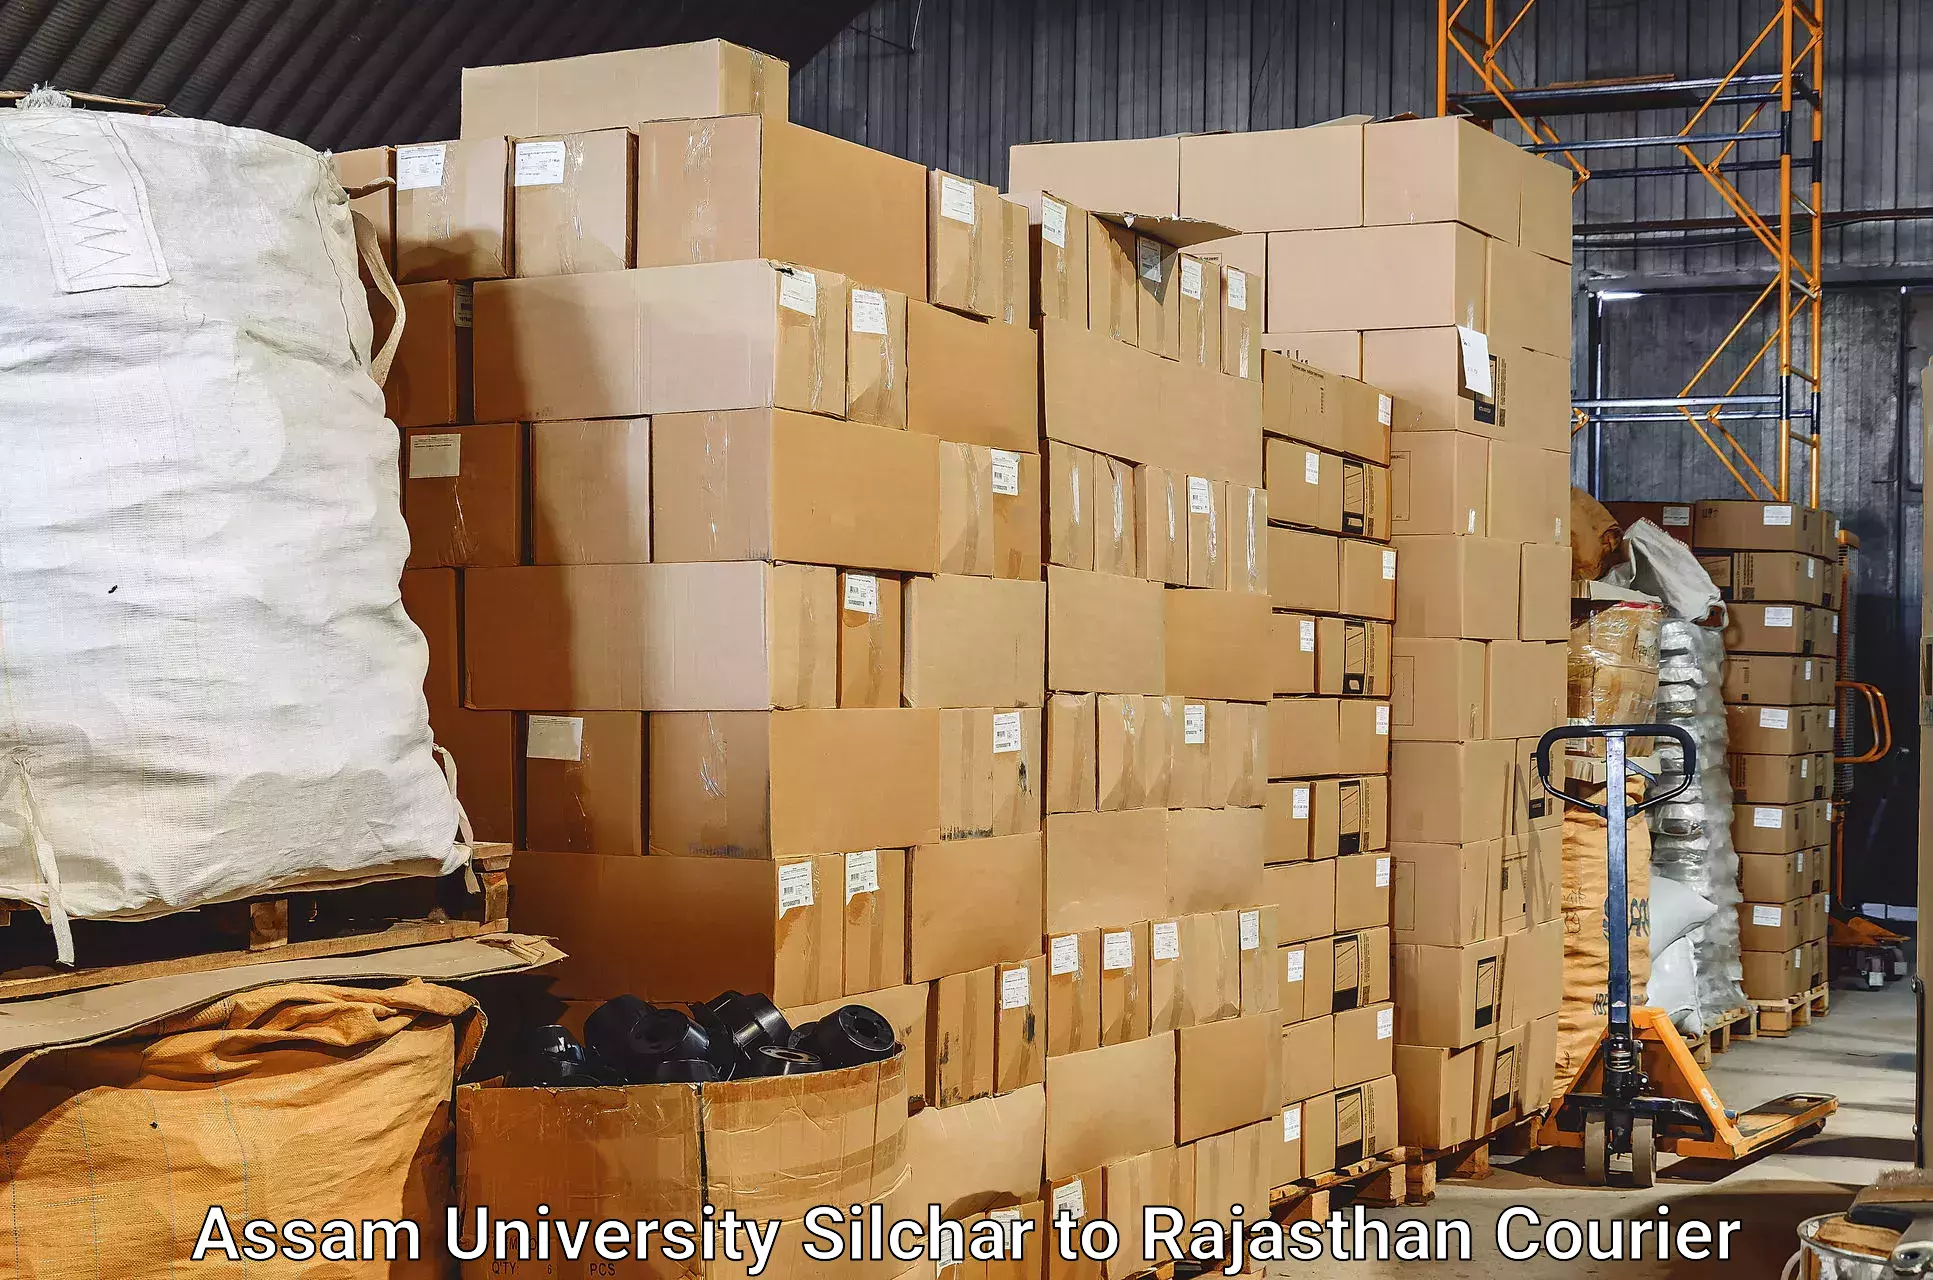 Baggage transport services in Assam University Silchar to Rajasthan